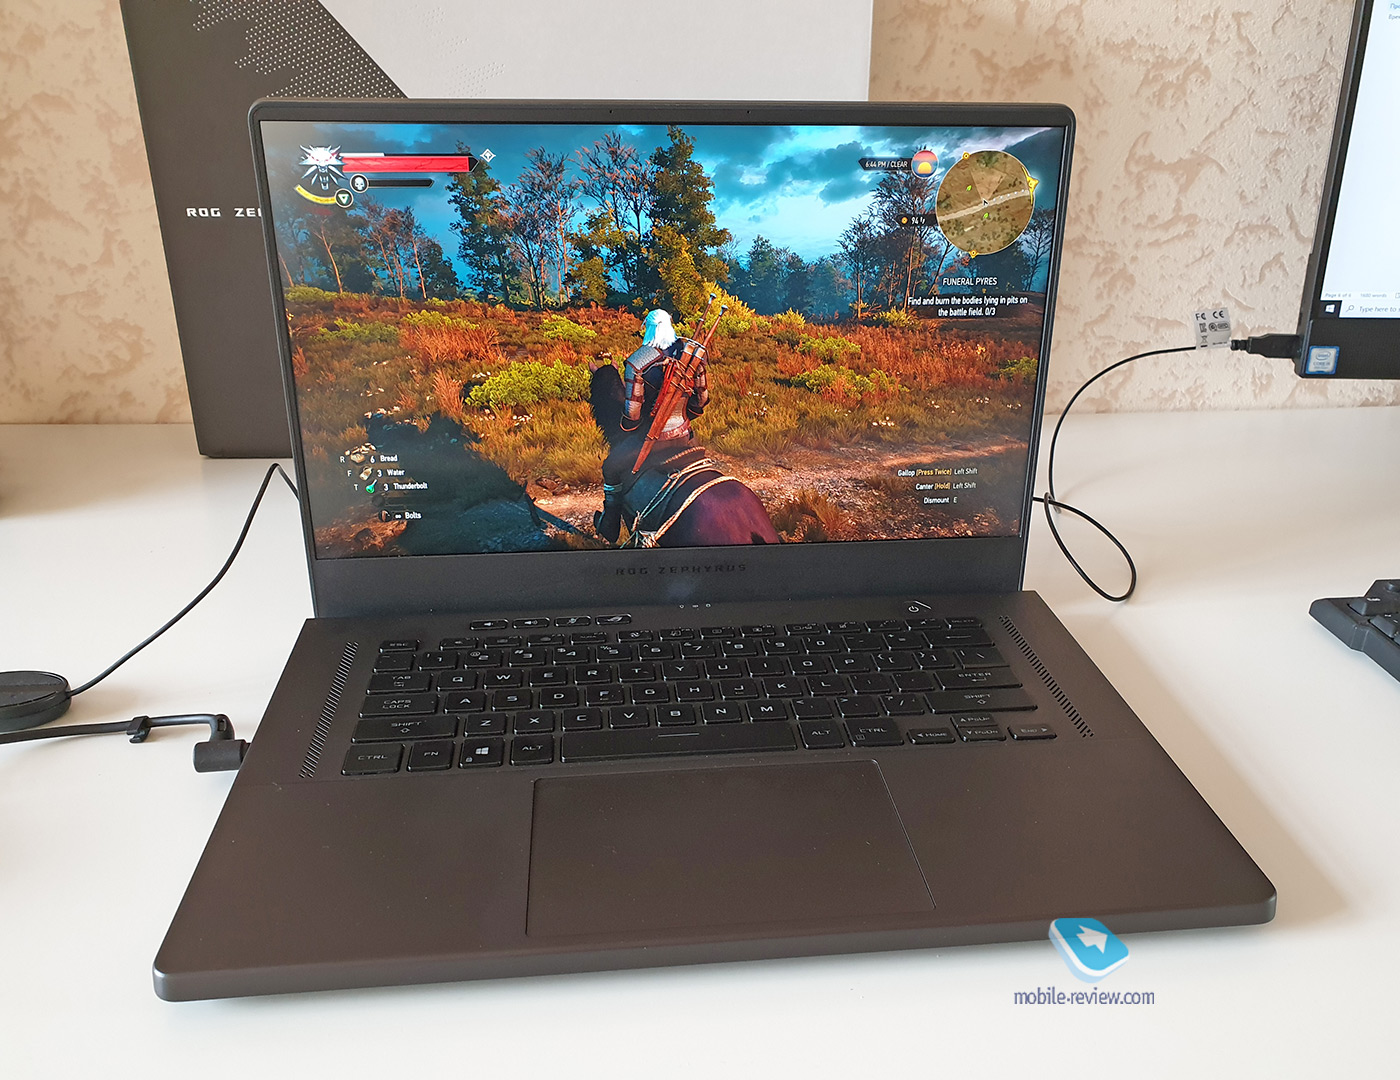 Asus Rog Zephyrus G15: how Nvidia + AMD performed a miracle